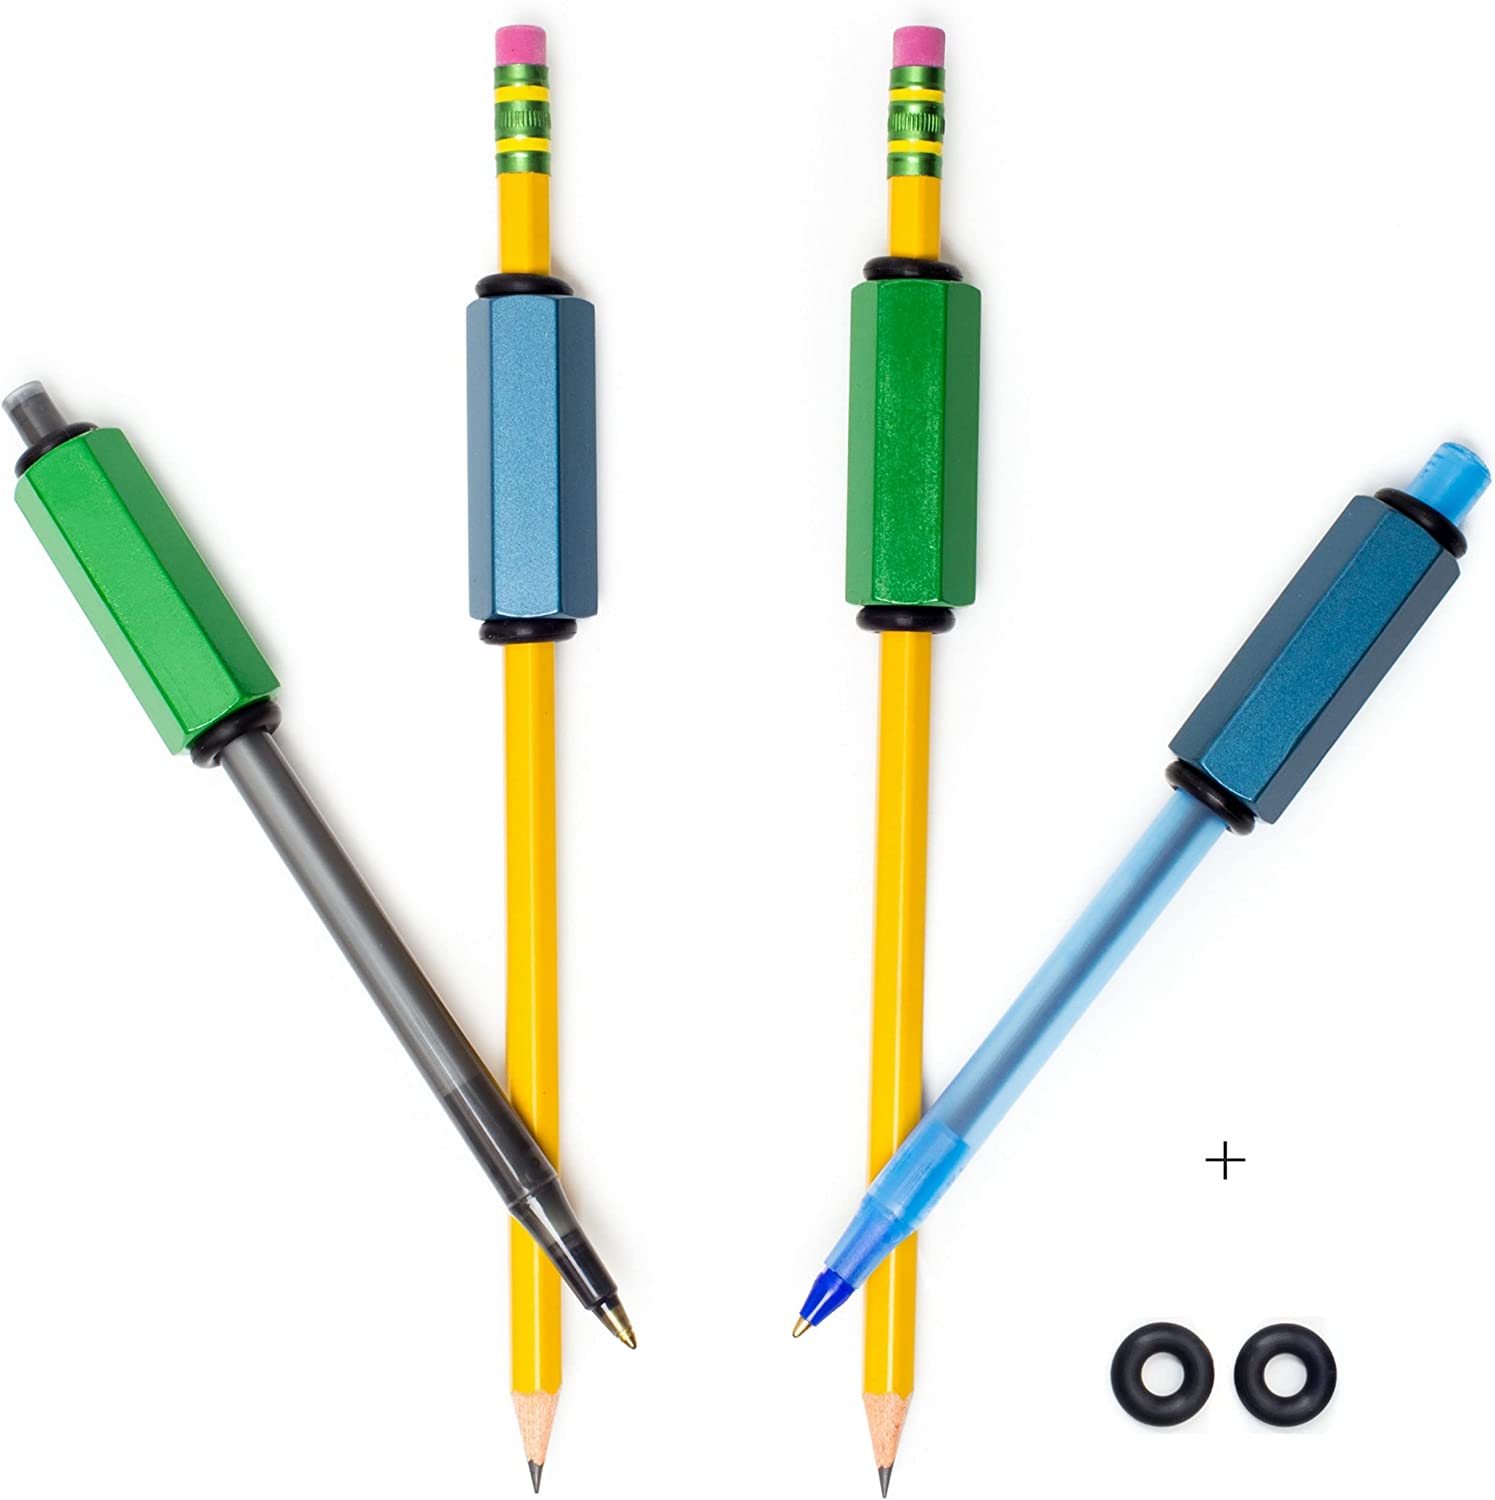 Pack of 4 Pen or Pencil Weights Handwriting Aid for Children